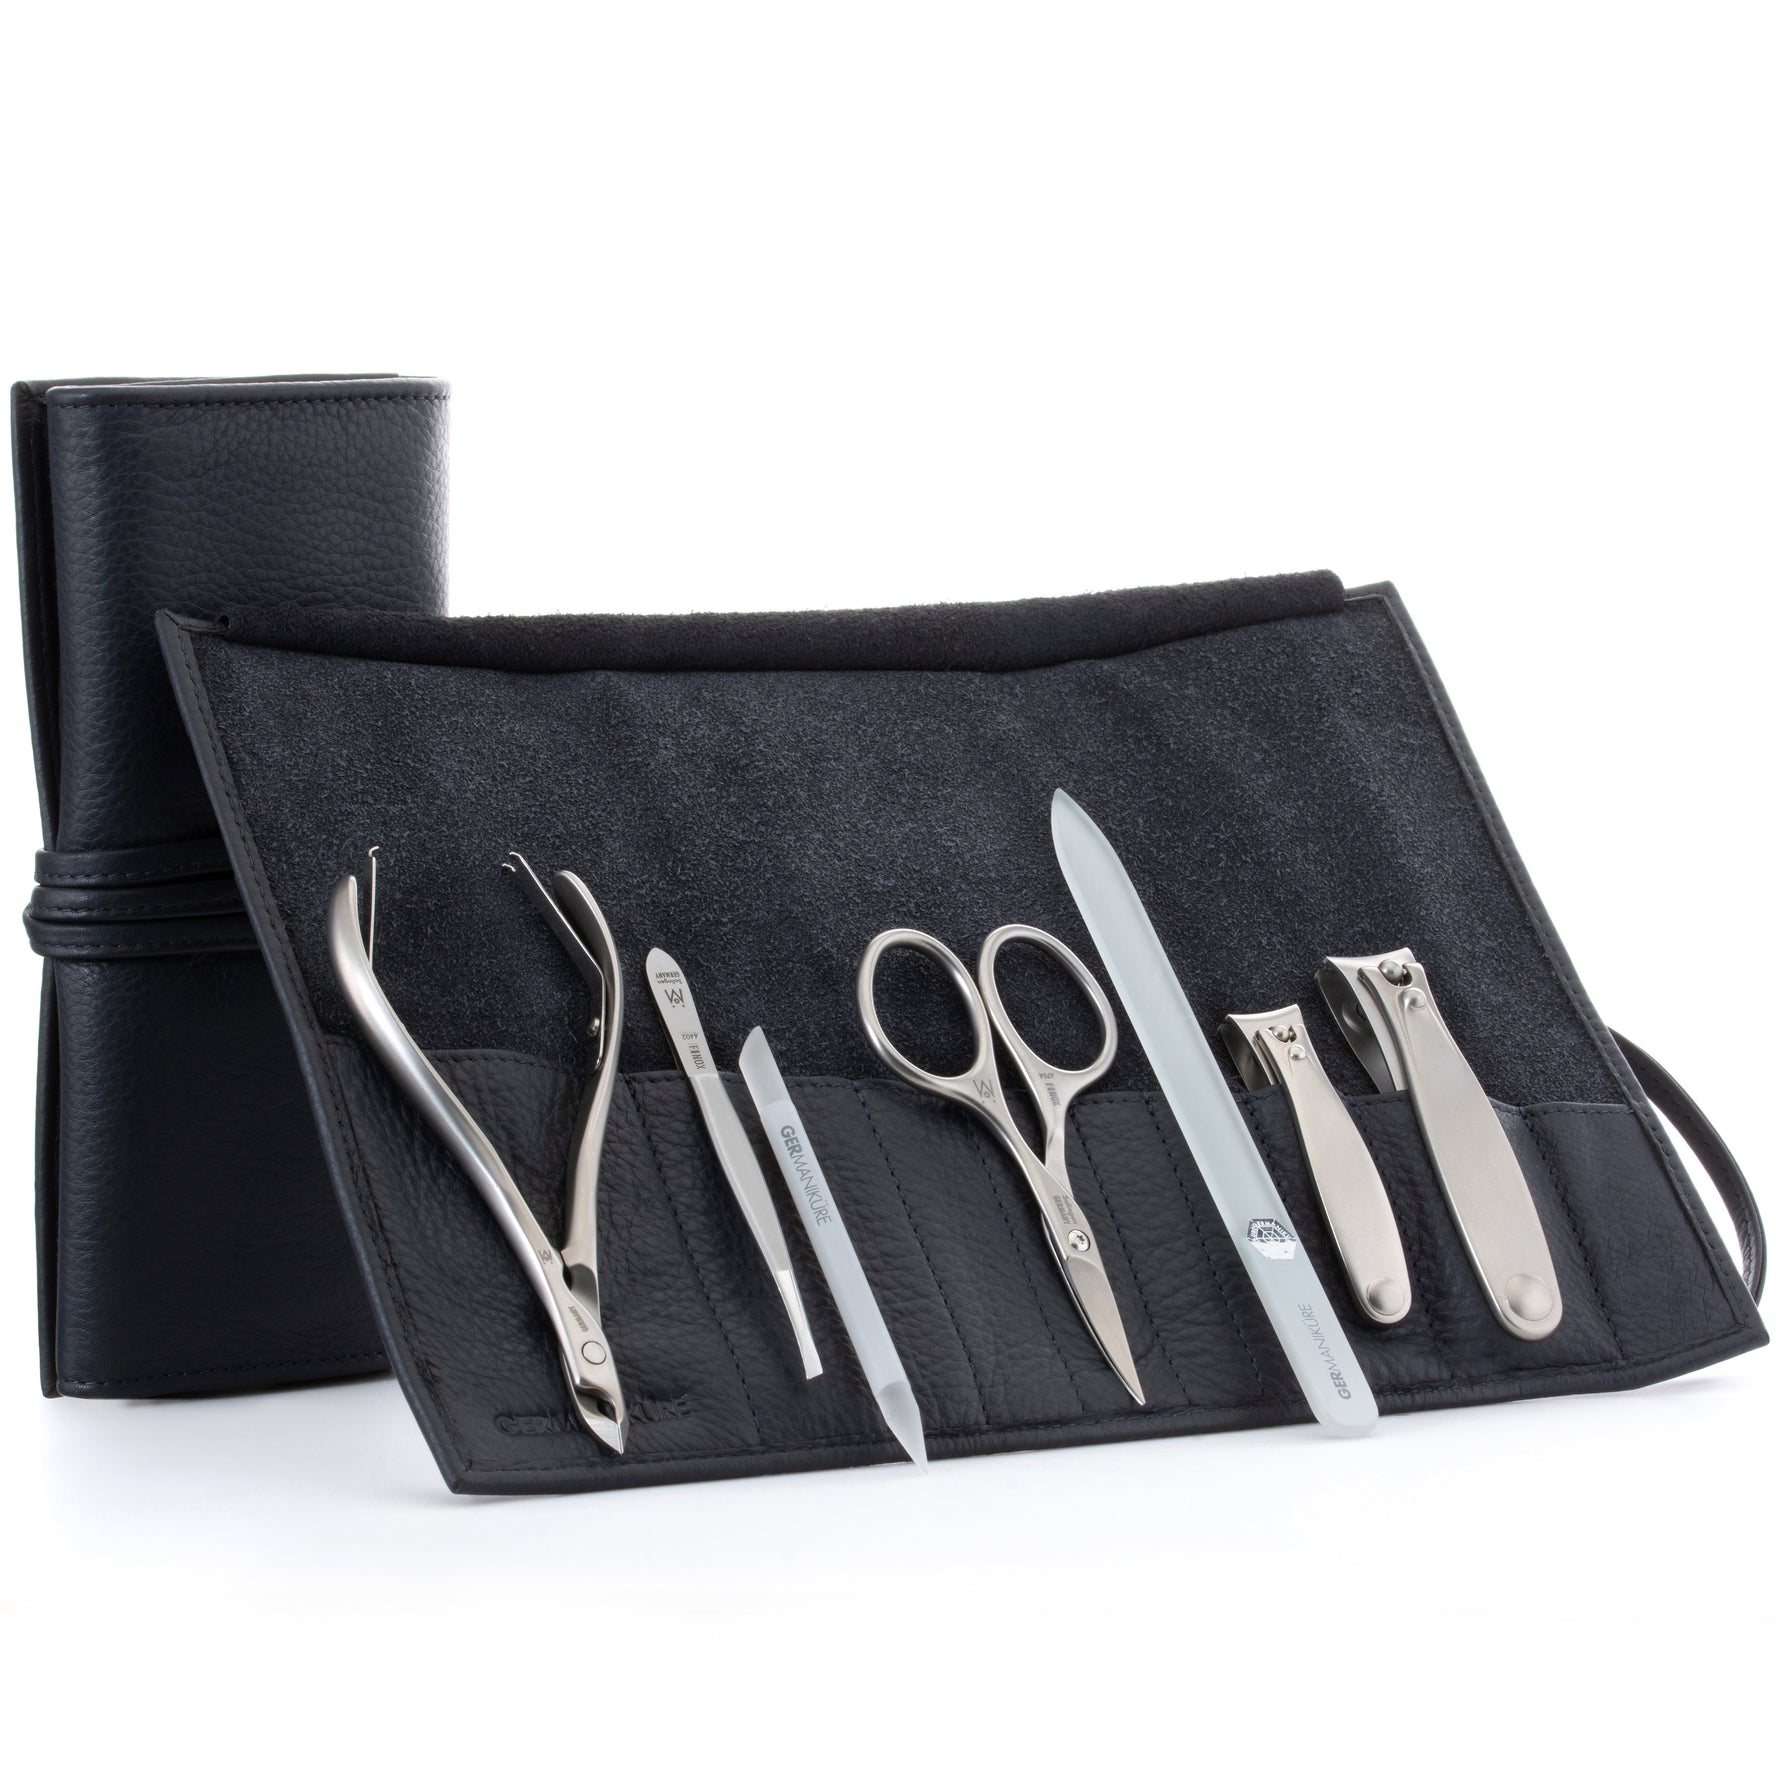 7pc Manicure Set with Glass Nail File in Roll